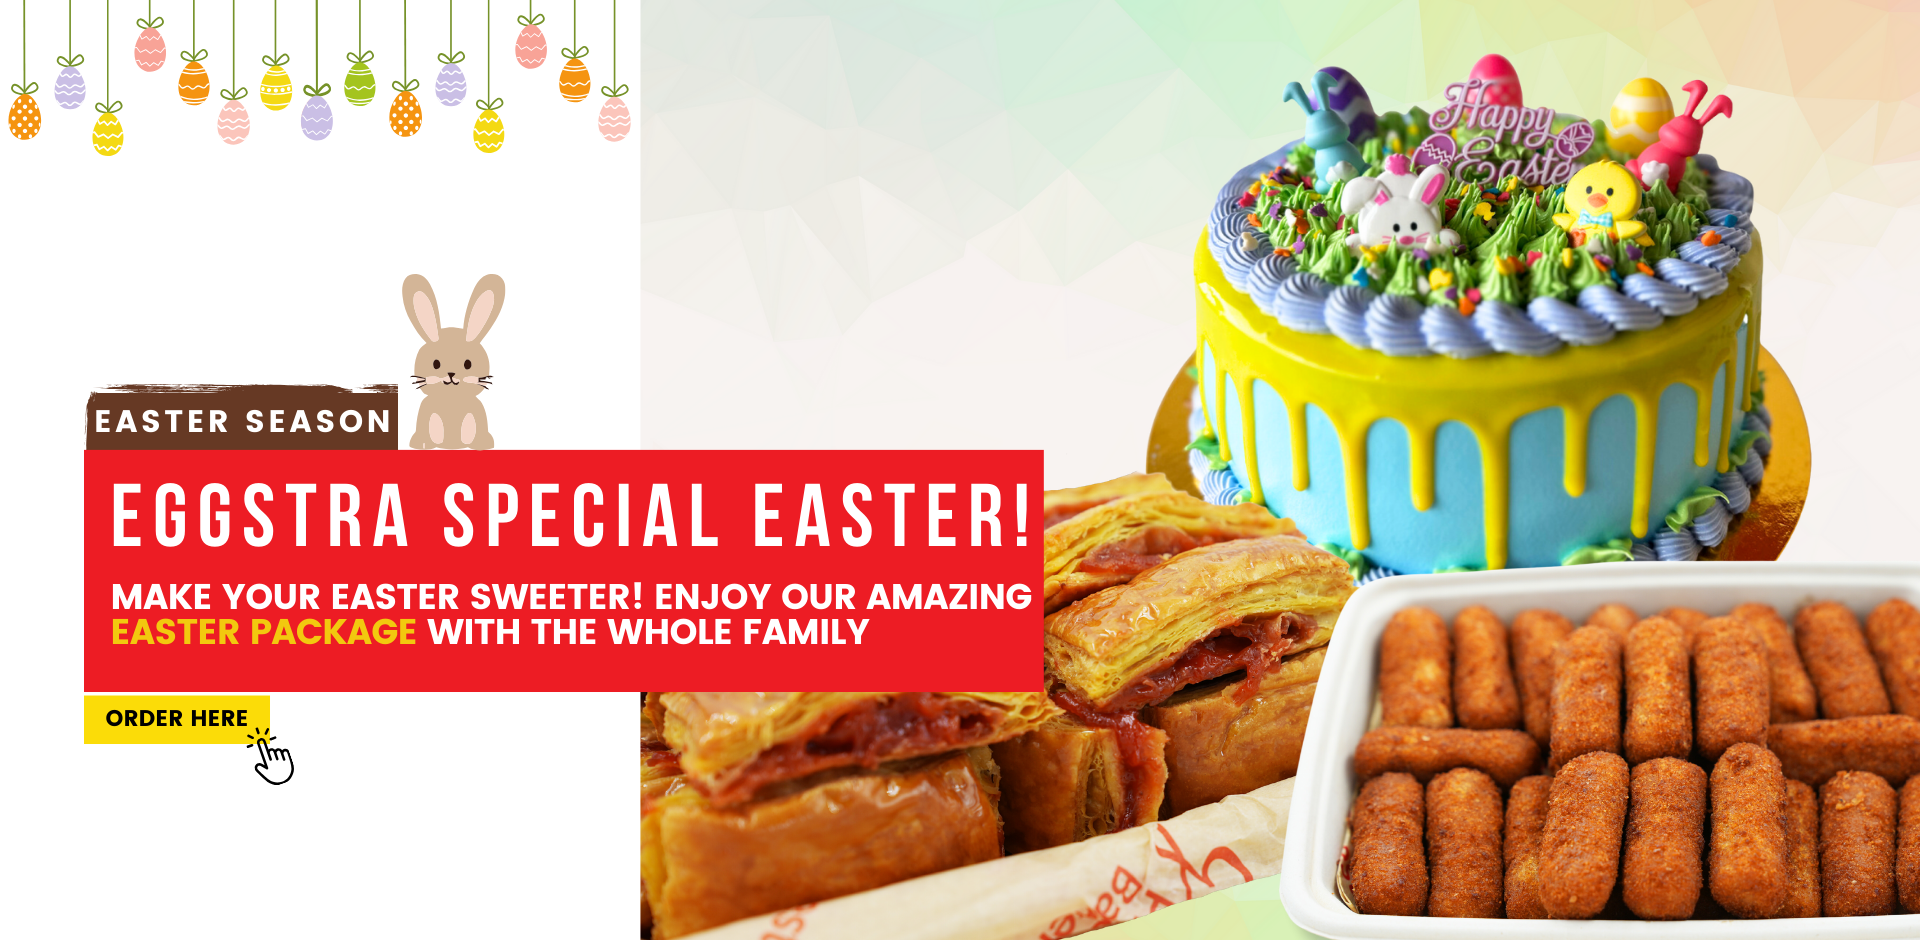 Easter season. Eggstra Special Easter!. Make your Easter sweeter! Enjoy our amazing Easter package with the whole family. ORDER HERE